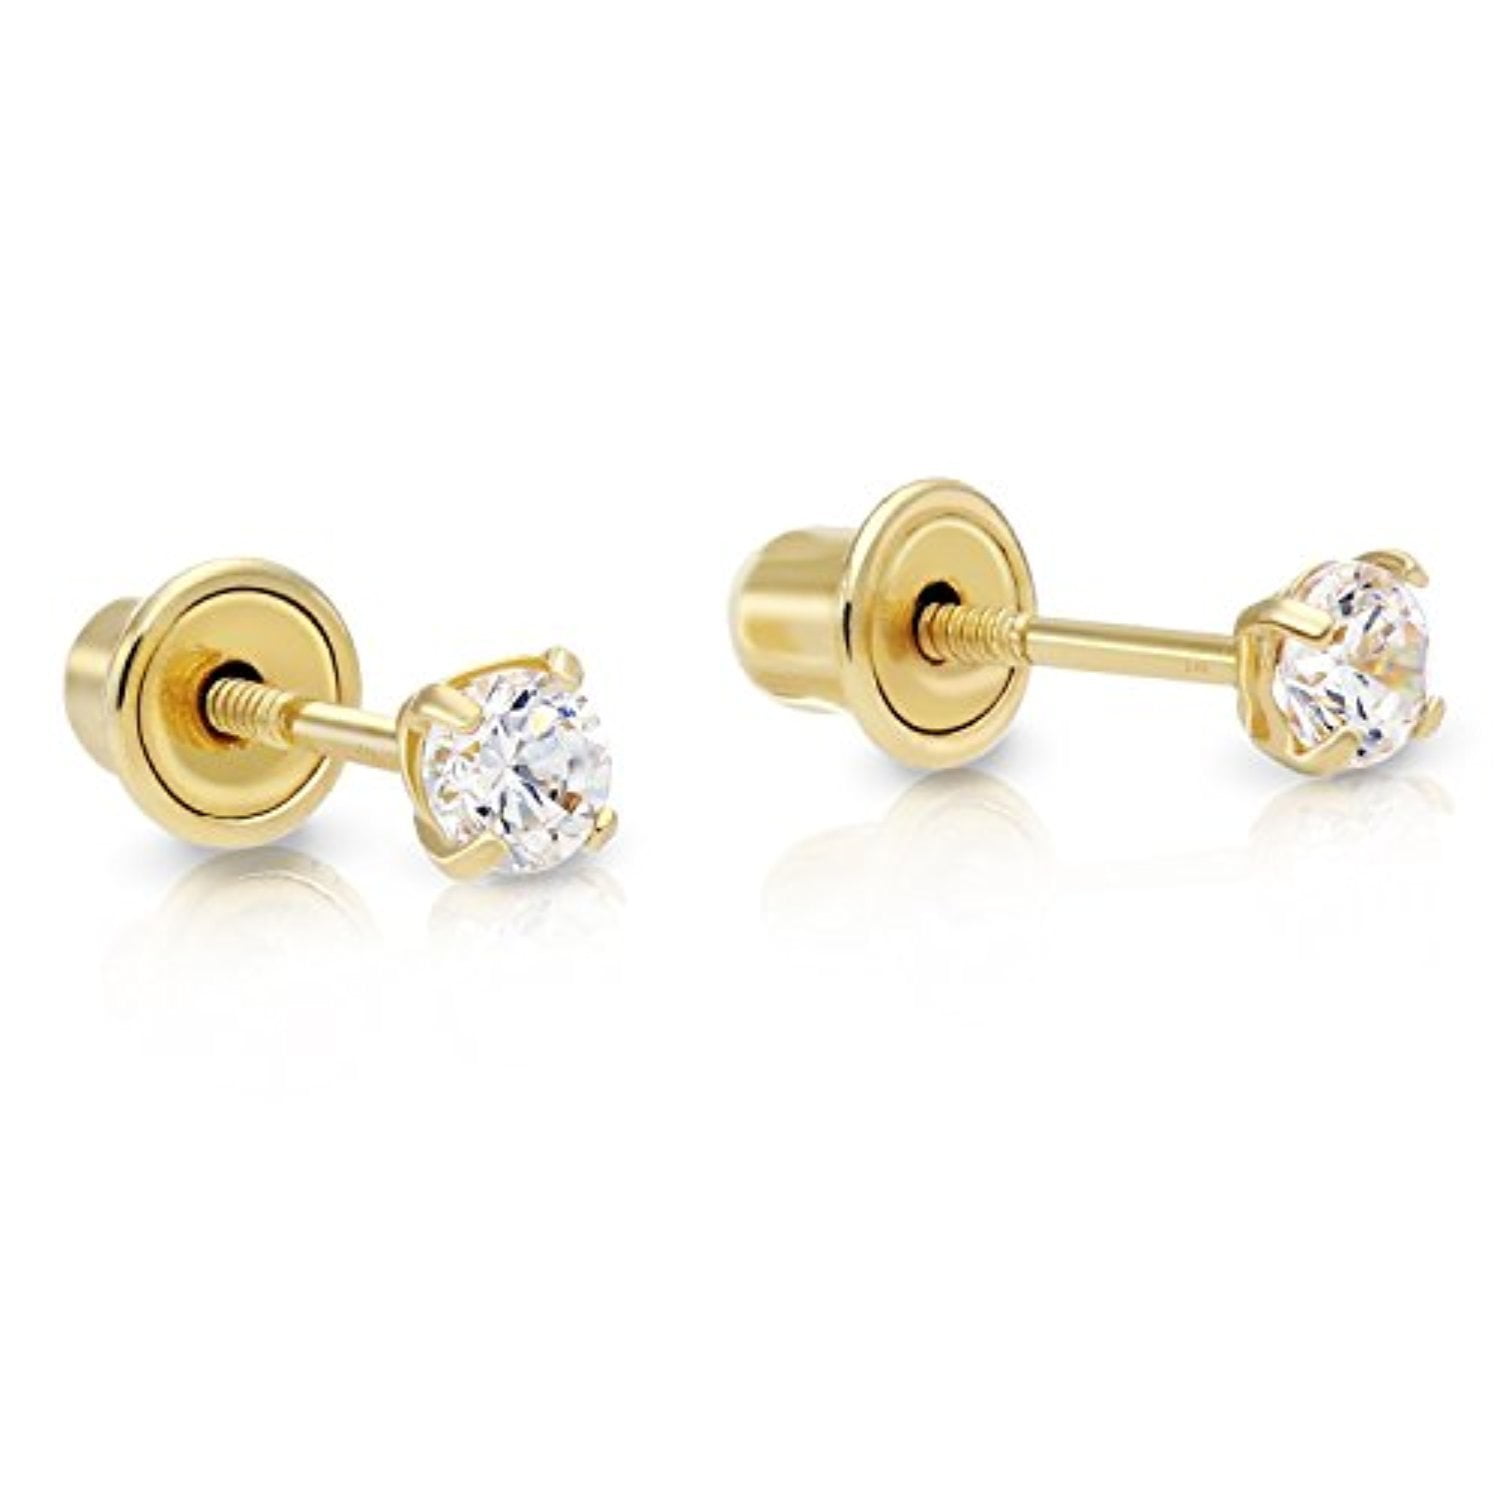 Wellingsale 14K Yellow Gold Polished 5mm Round Solitaire Basket Style Prong Set Stud Earrings With Pushback